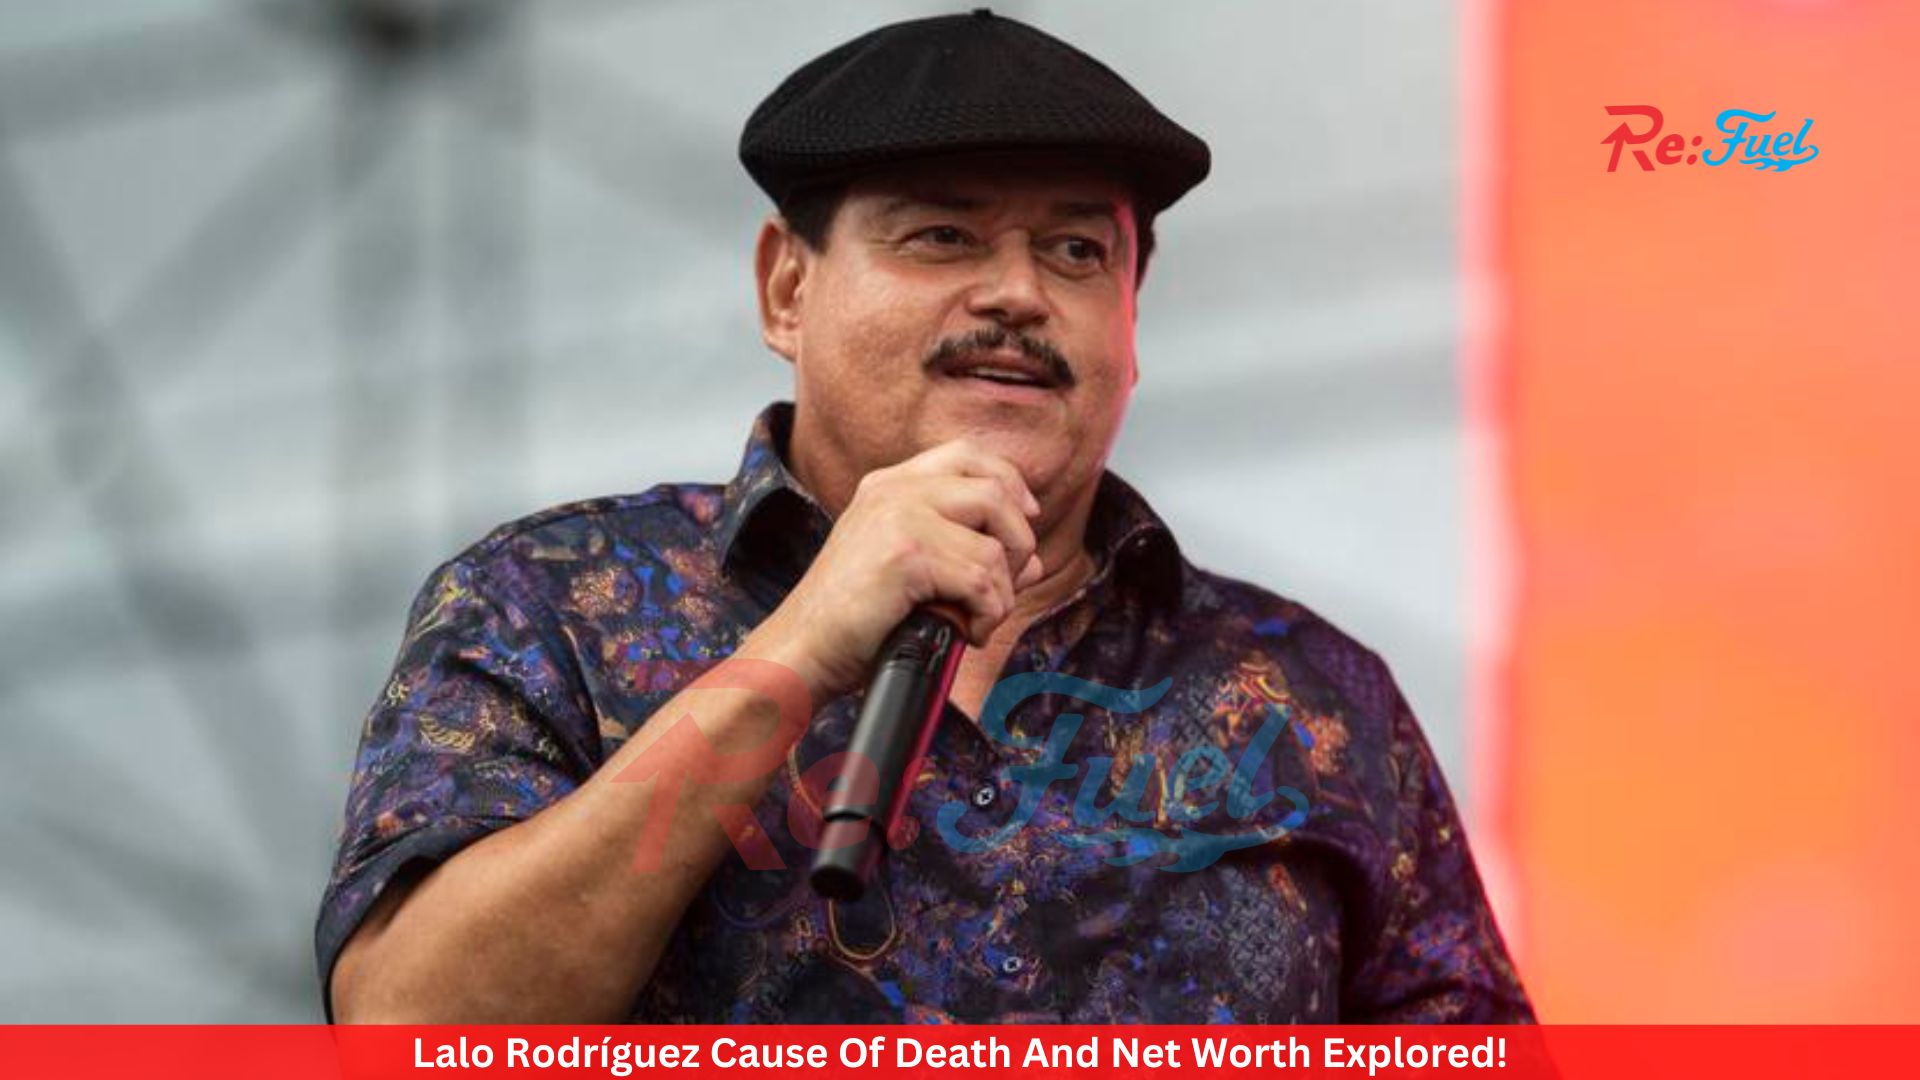 Lalo Rodríguez Cause Of Death And Net Worth Explored!